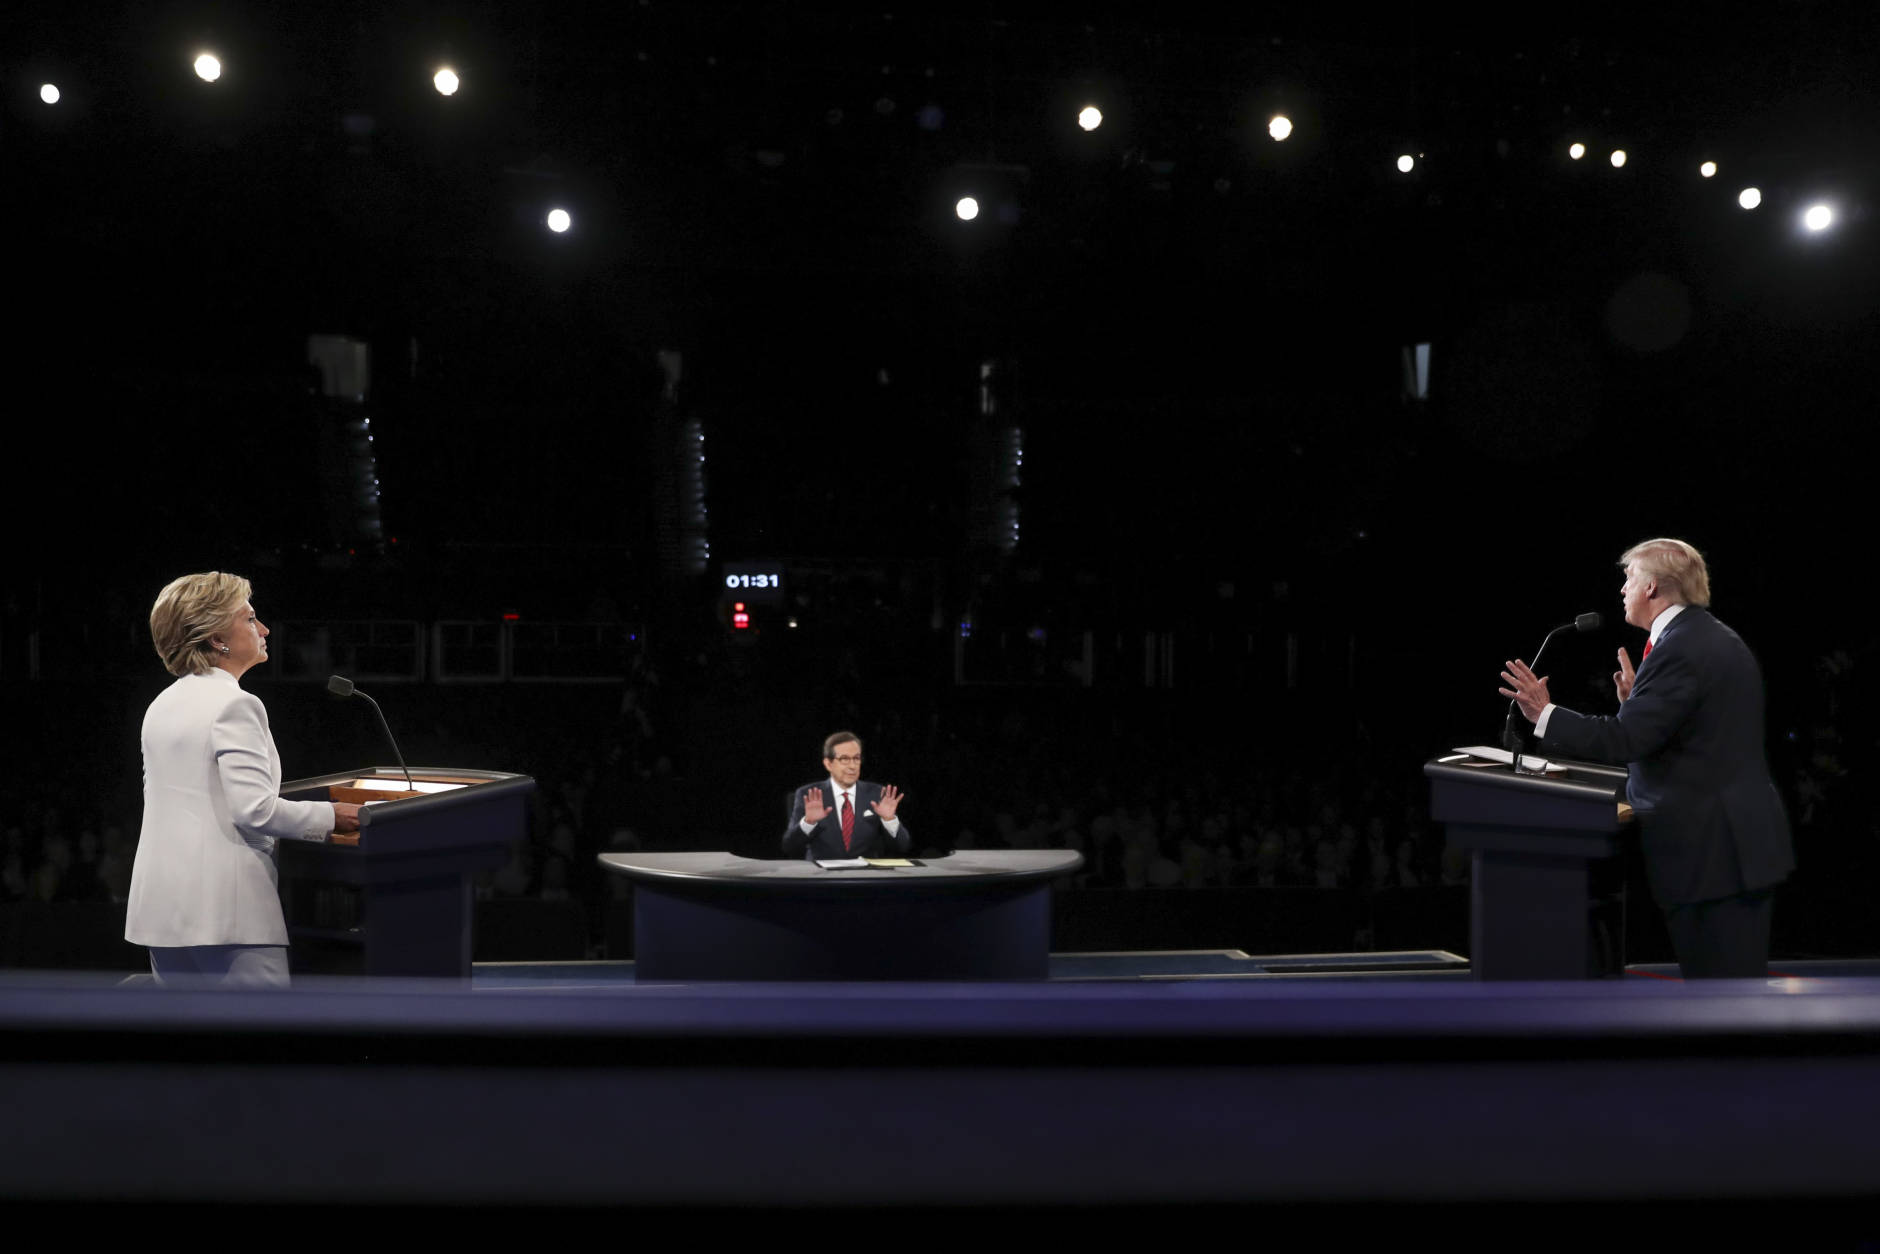 Democratic presidential nominee Hillary Clinton listen as Republican presidential nominee Donald Trump answers Moderator Chris Wallace's question during the third presidential debate at UNLV in Las Vegas, Wednesday, Oct. 19, 2016. (Joe Raedle/Pool via AP)